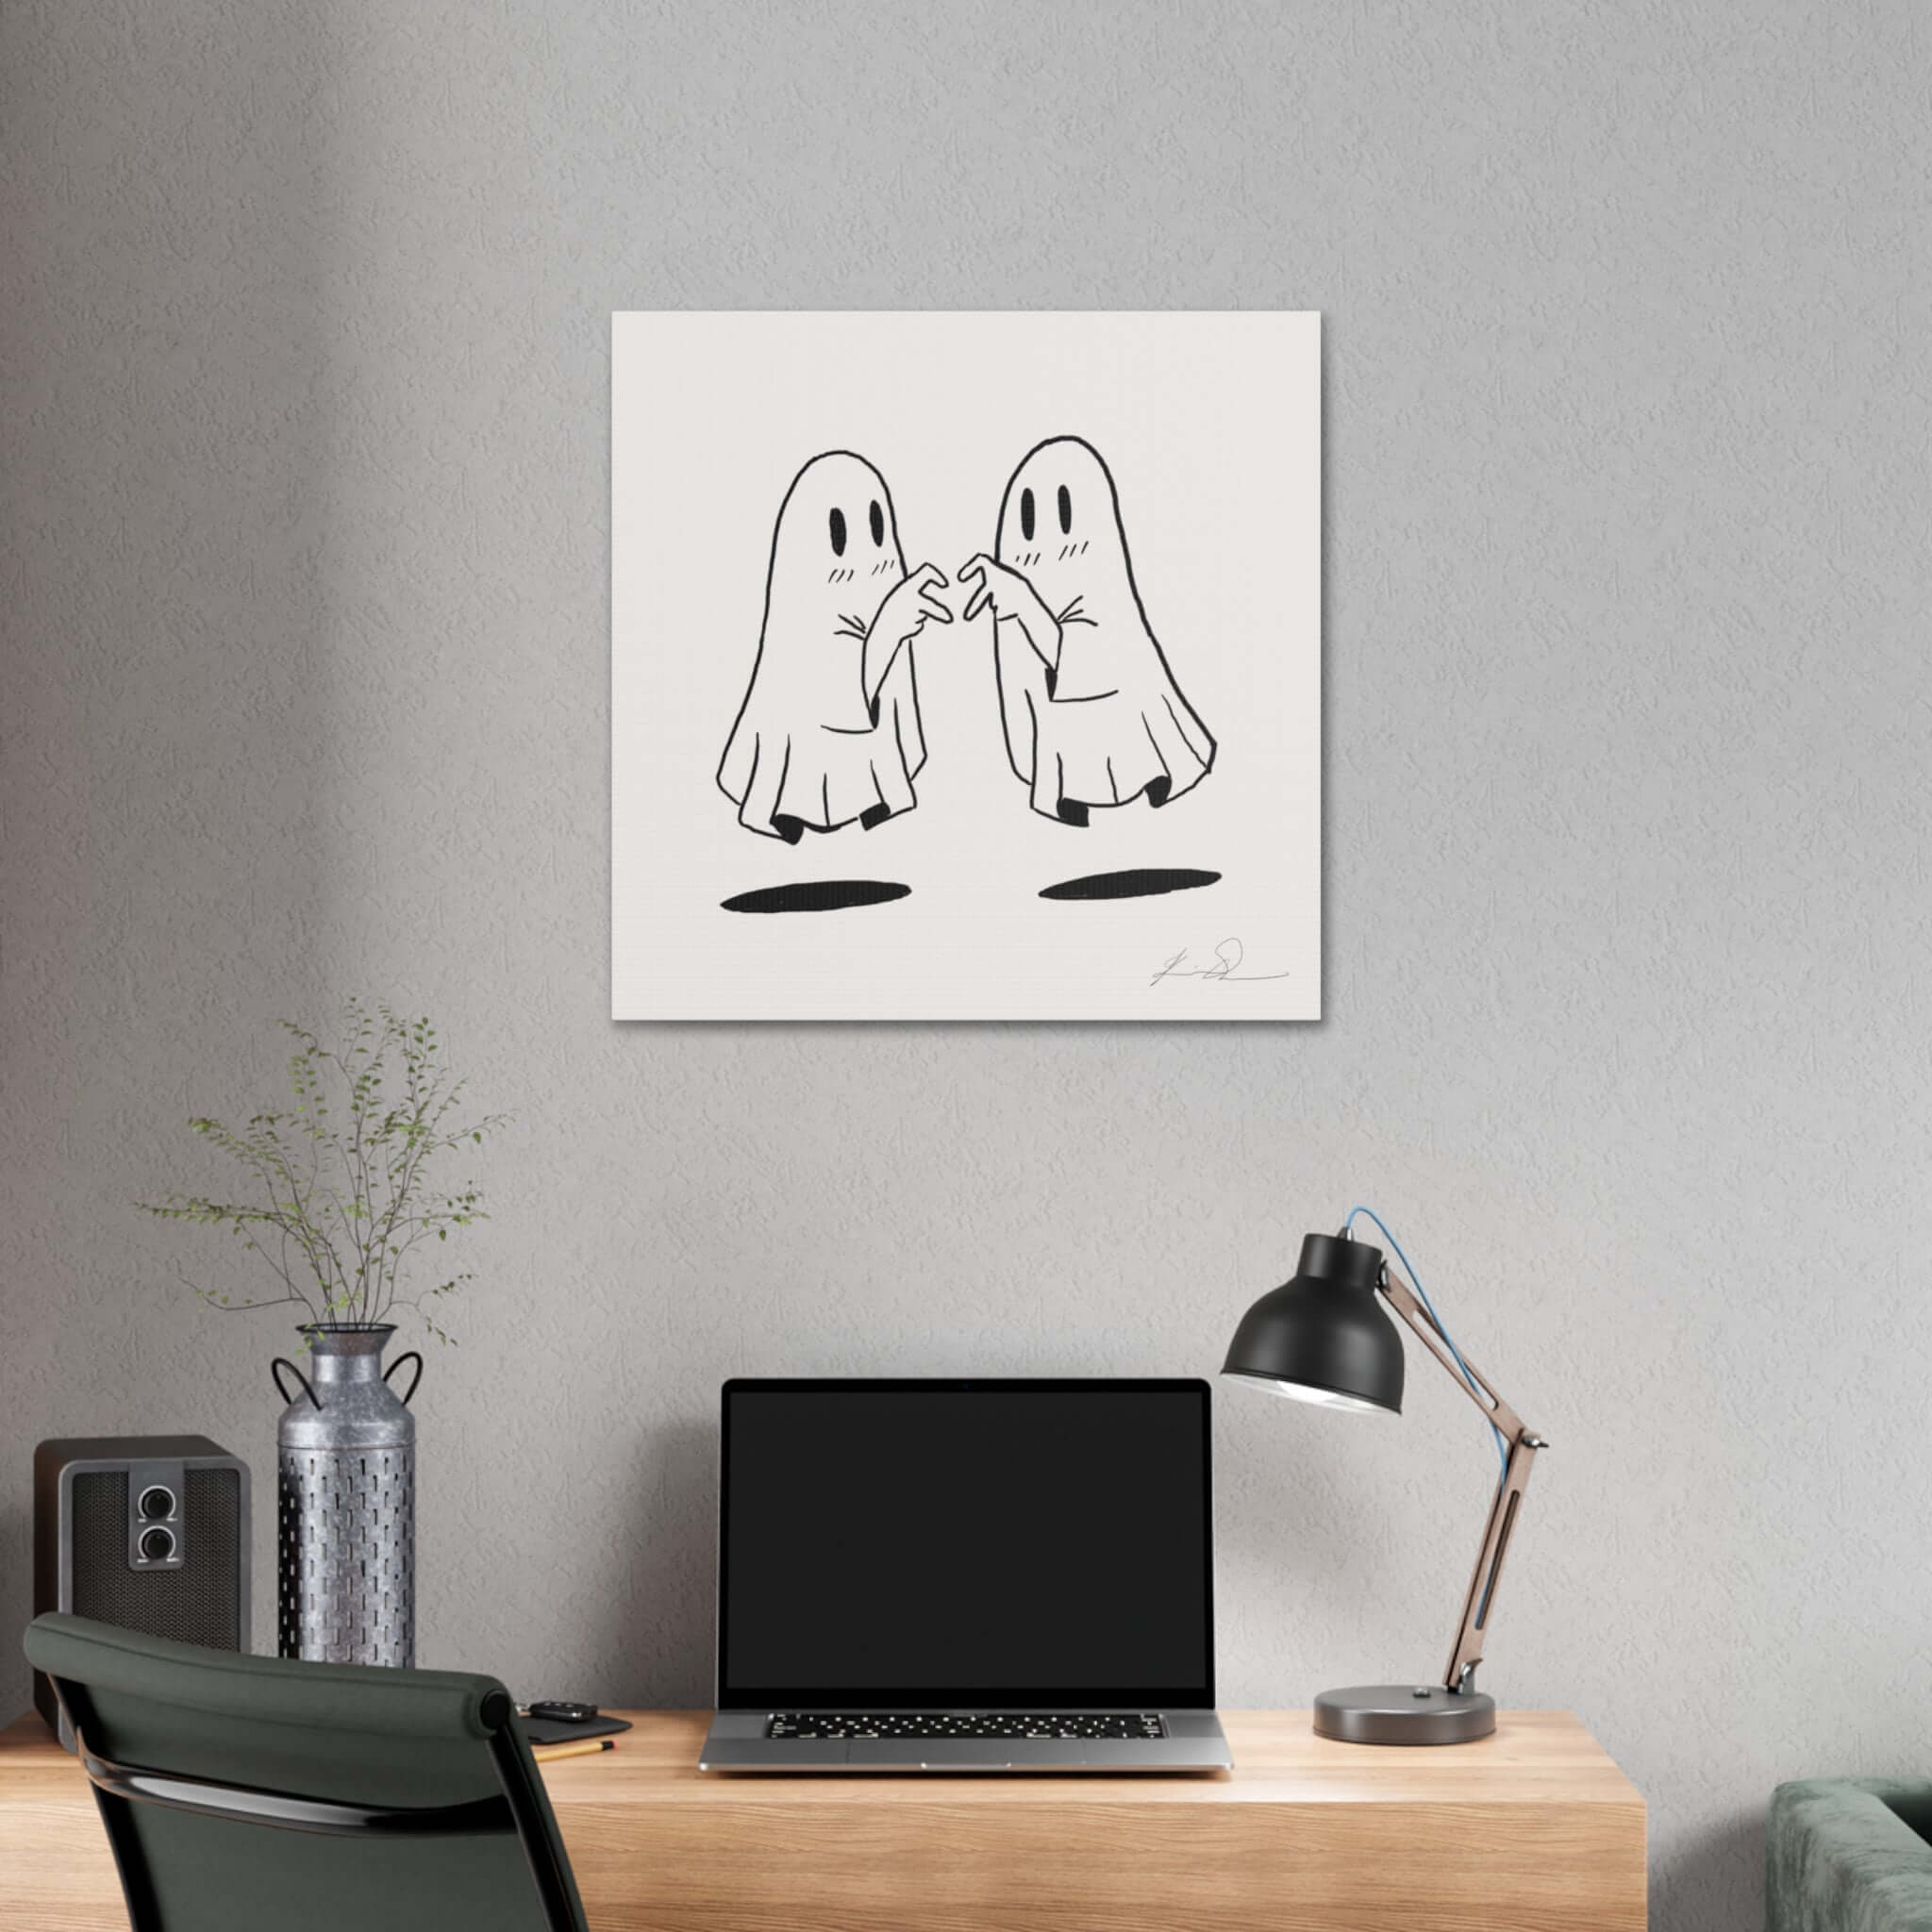 Ghost friends art canvas print titled "Past Lives" displayed above a desk with laptop and lamp.